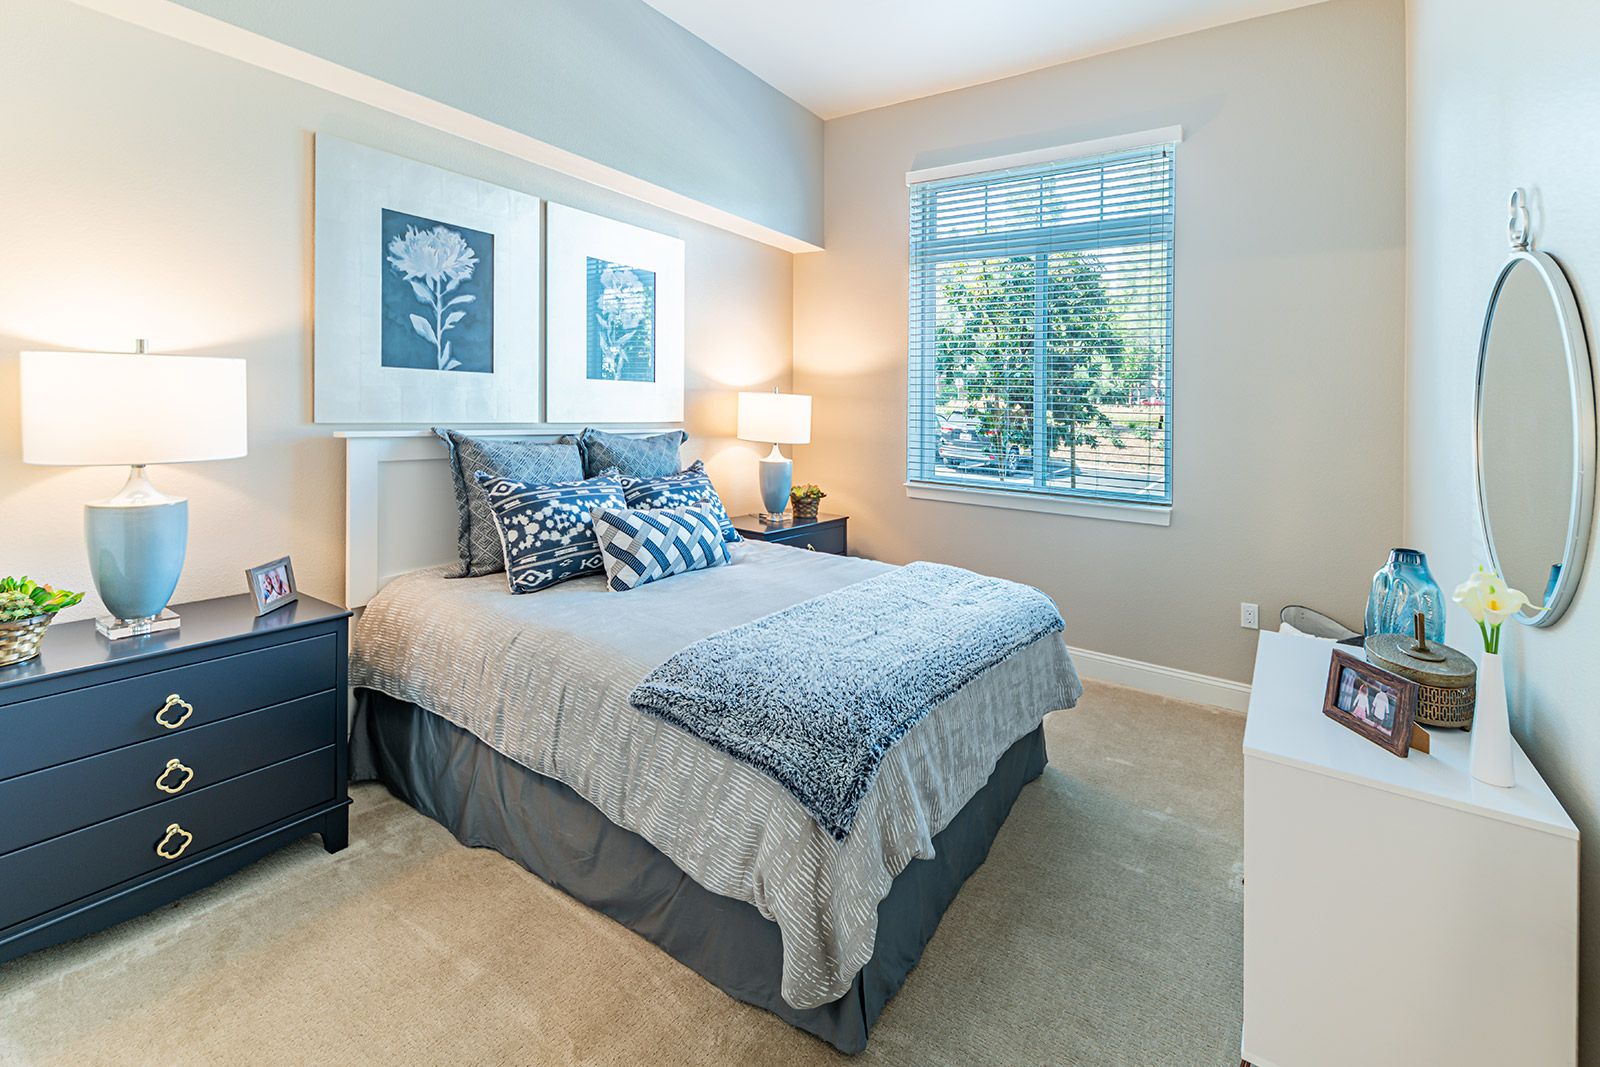 Interior view of a cozy bedroom at Allara Senior Living with tasteful decor, furniture, and plants.